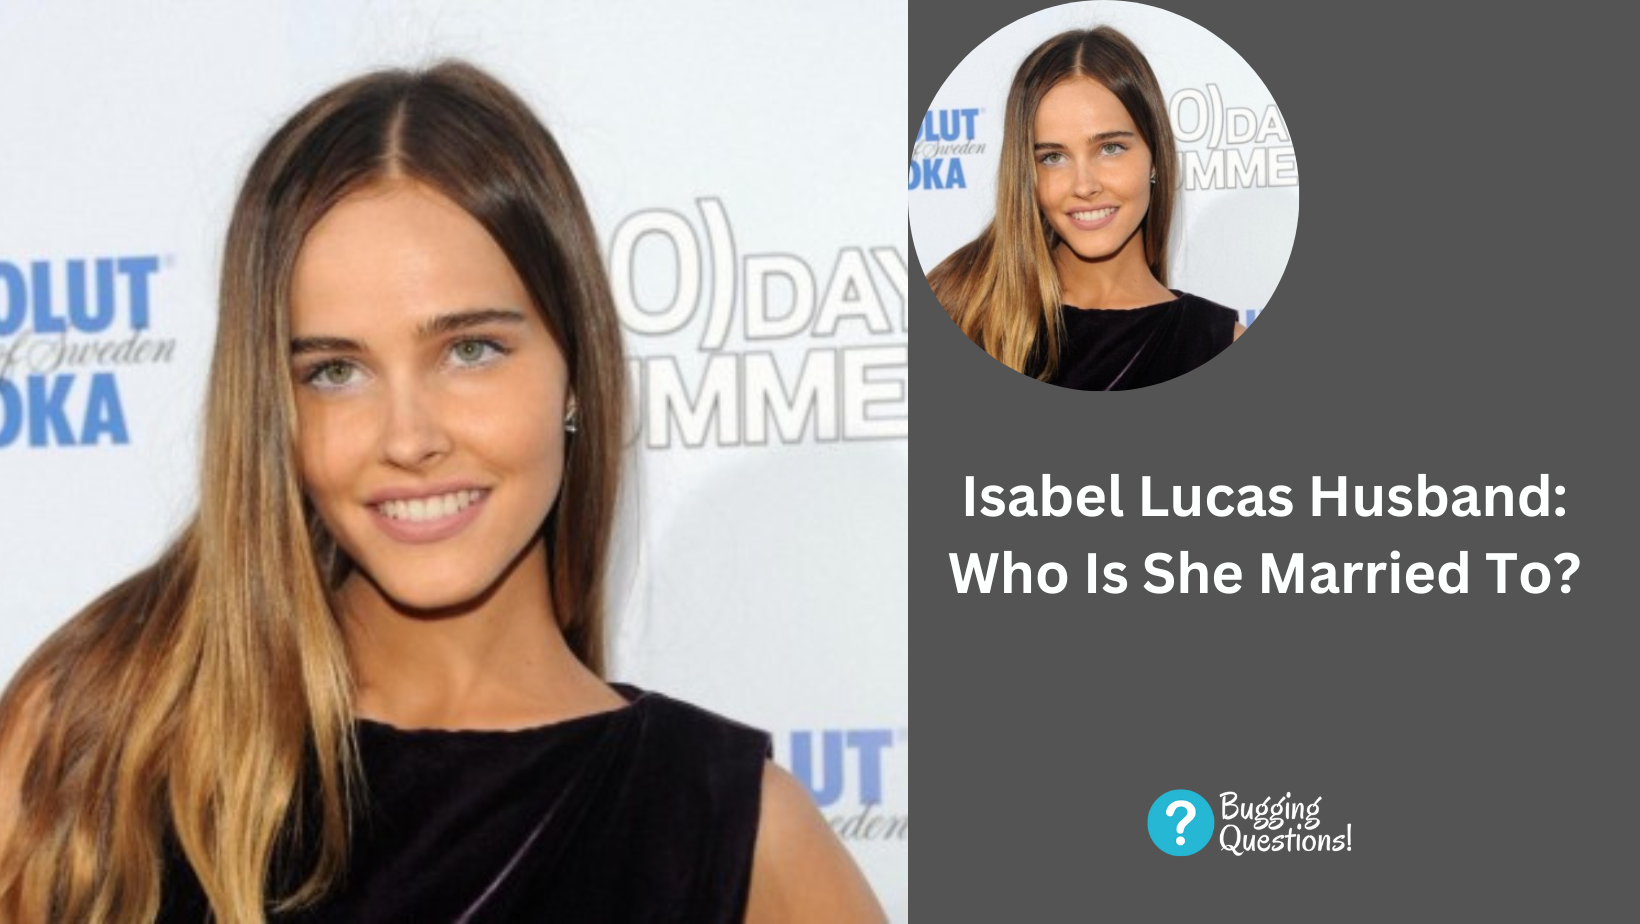 Isabel Lucas Husband: Who Is She Married To?